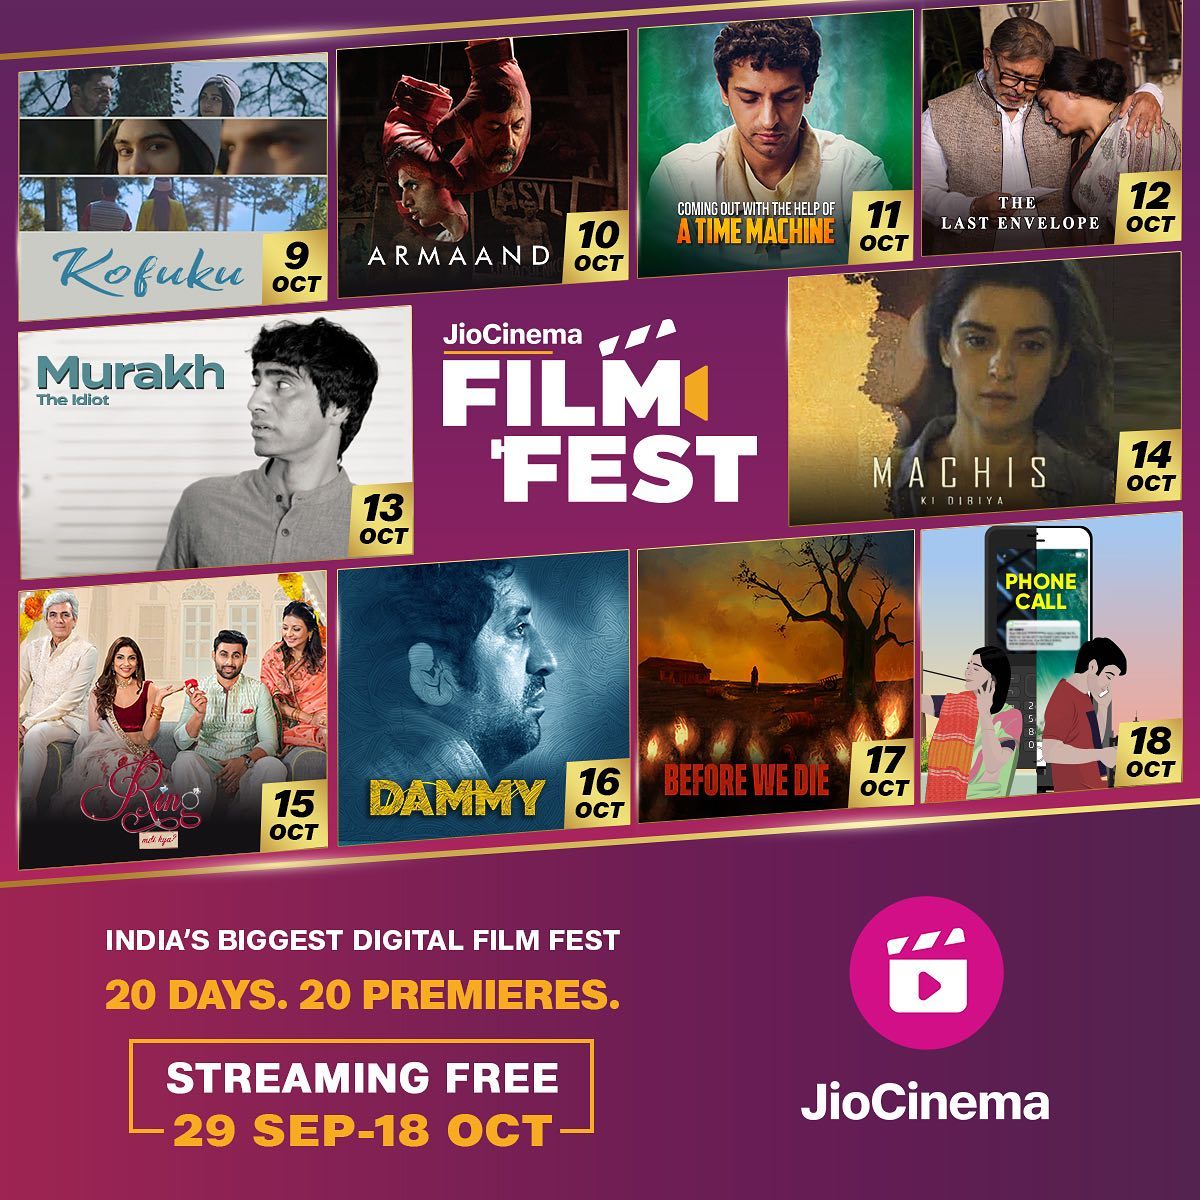 Celebrating endless emotions, unforgettable characters and some of India's finest films at #JioCinemaFilmFest!

20 great Indian stories premiering over 20 days. Streaming free on #JioCinema, starting 29 September.